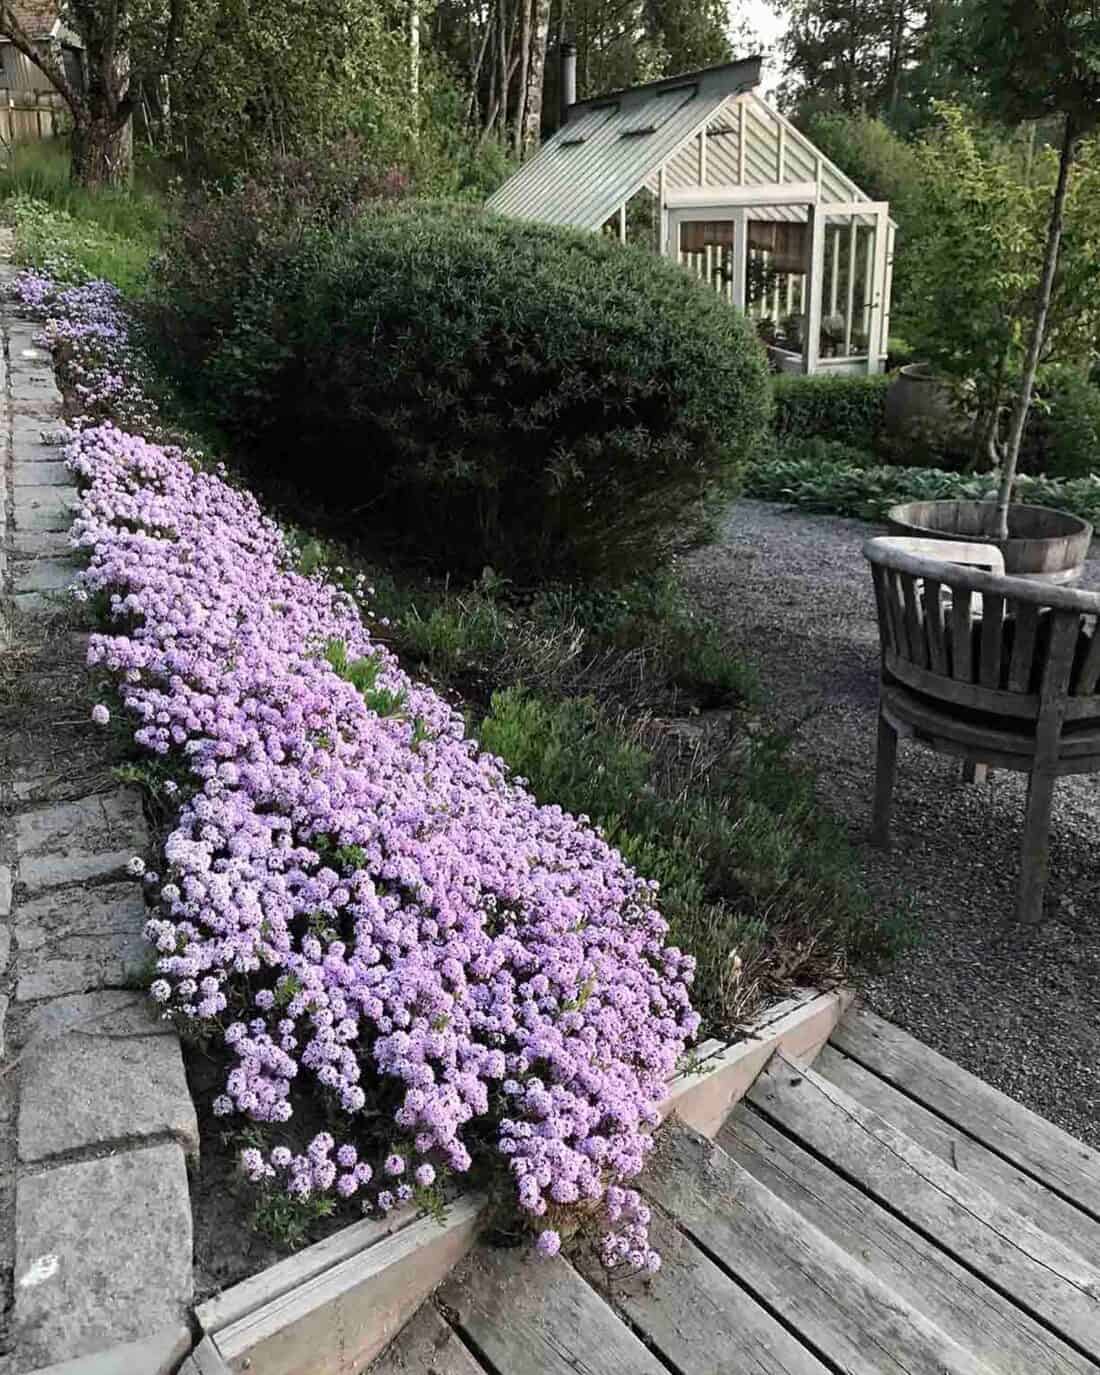 A garden pathway lined with purple flowers leading to a greenhouse.